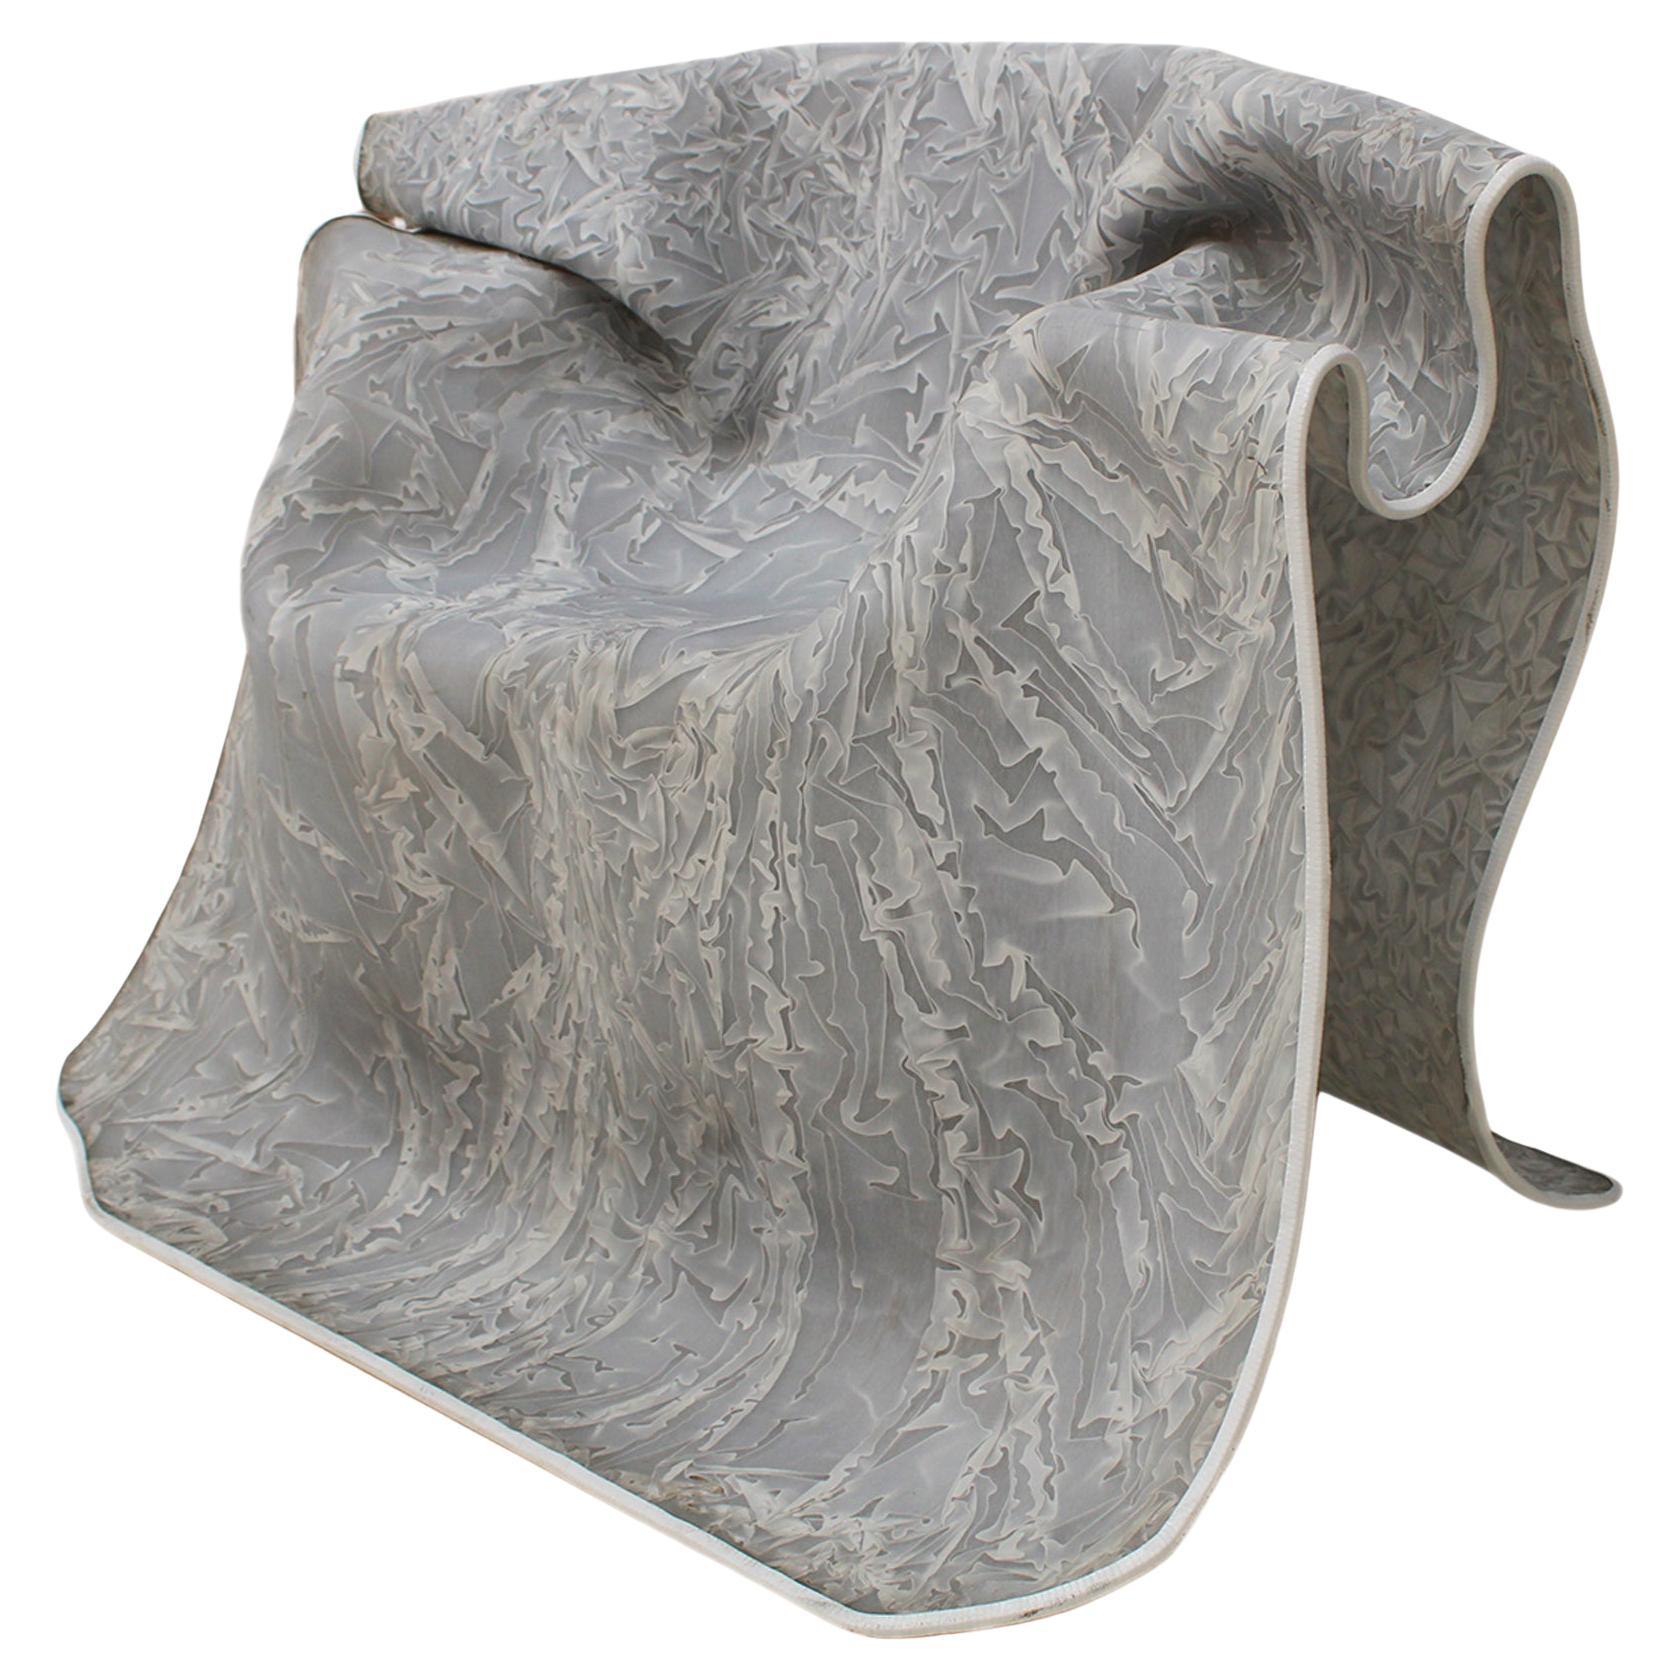 Sculptural Organic Grey Chair Made of Fiberglass, Italy, 1980s For Sale